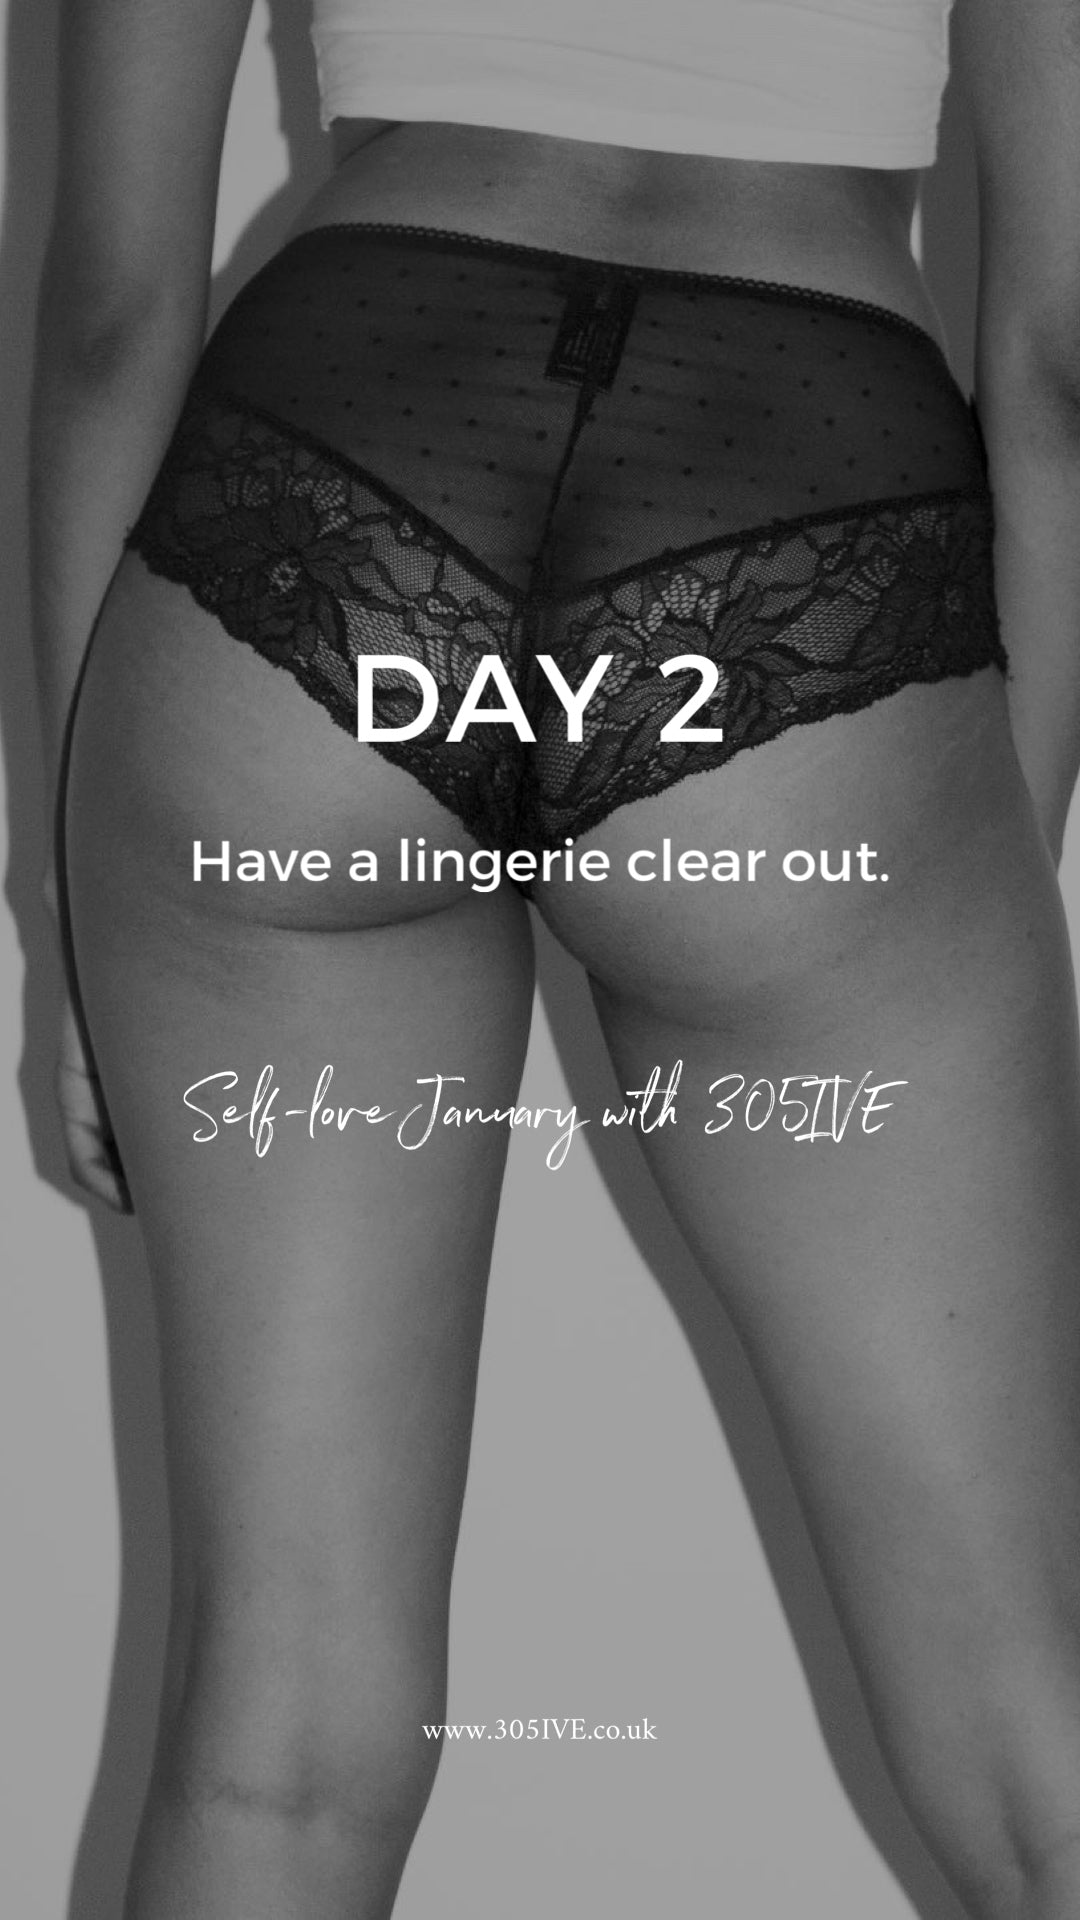 DAY 2 : Have a lingerie clear out | Self-love January with 305IVE.